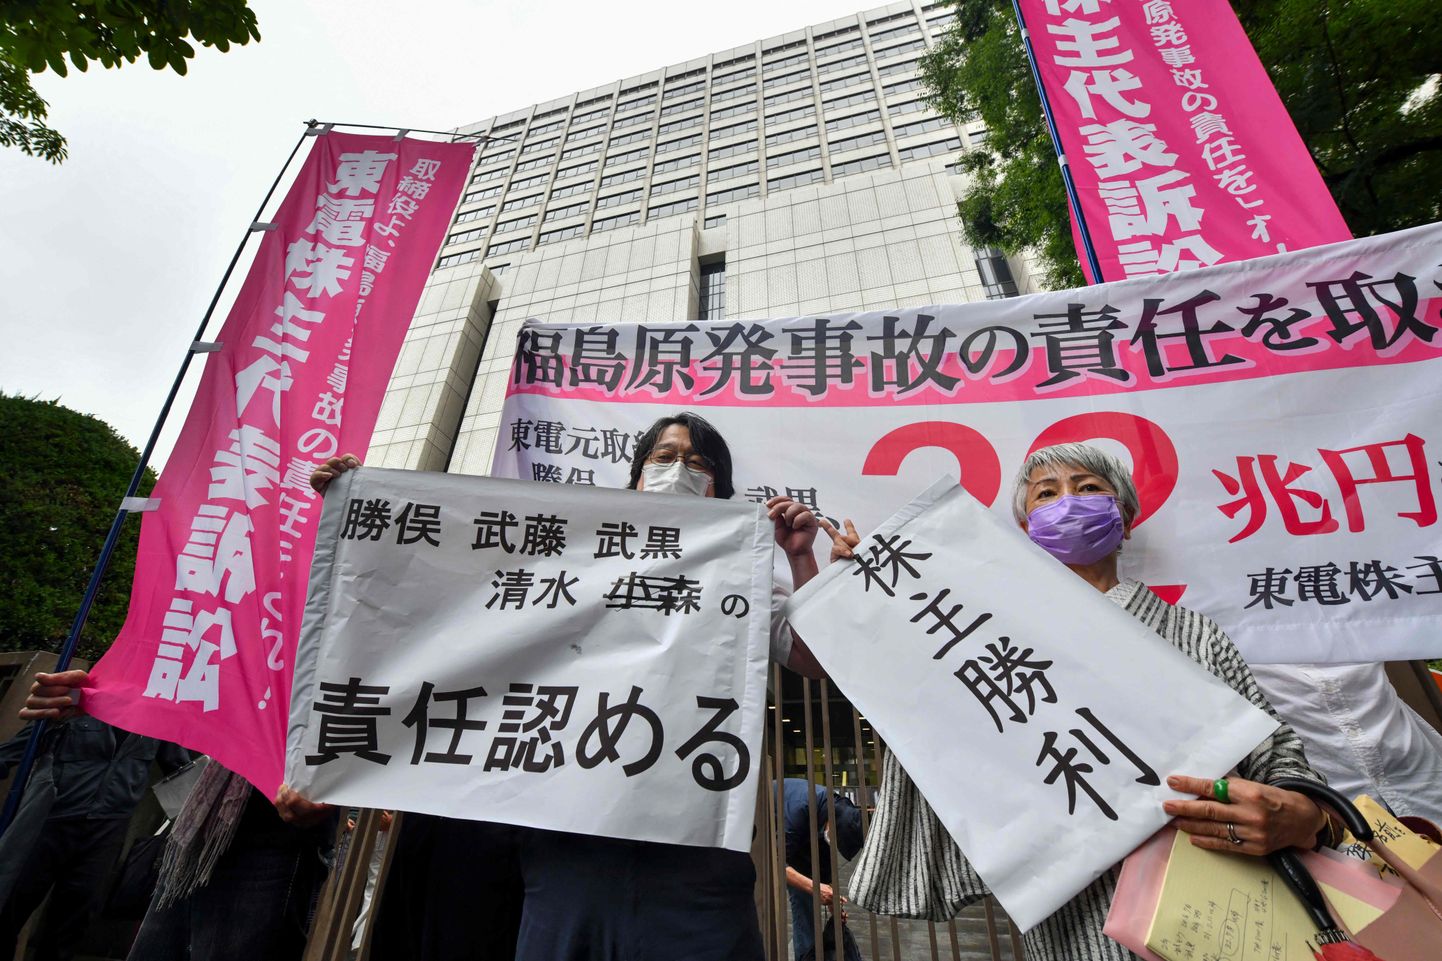 Plaintiffs in the Tokyo Electric Power Company (TEPCO) shareholder derivative suit, brought by shareholders over the nuclear disaster triggered by the 2011 tsunami, react following the court's decision outside the Tokyo District Court on July 13, 2022. - A Tokyo court on July 13 ordered former executives from the operator of the Fukushima nuclear plant involved in the 2011 disaster to pay around 94.8 billion USD in damages, local media said. (Photo by Kazuhiro NOGI / AFP)